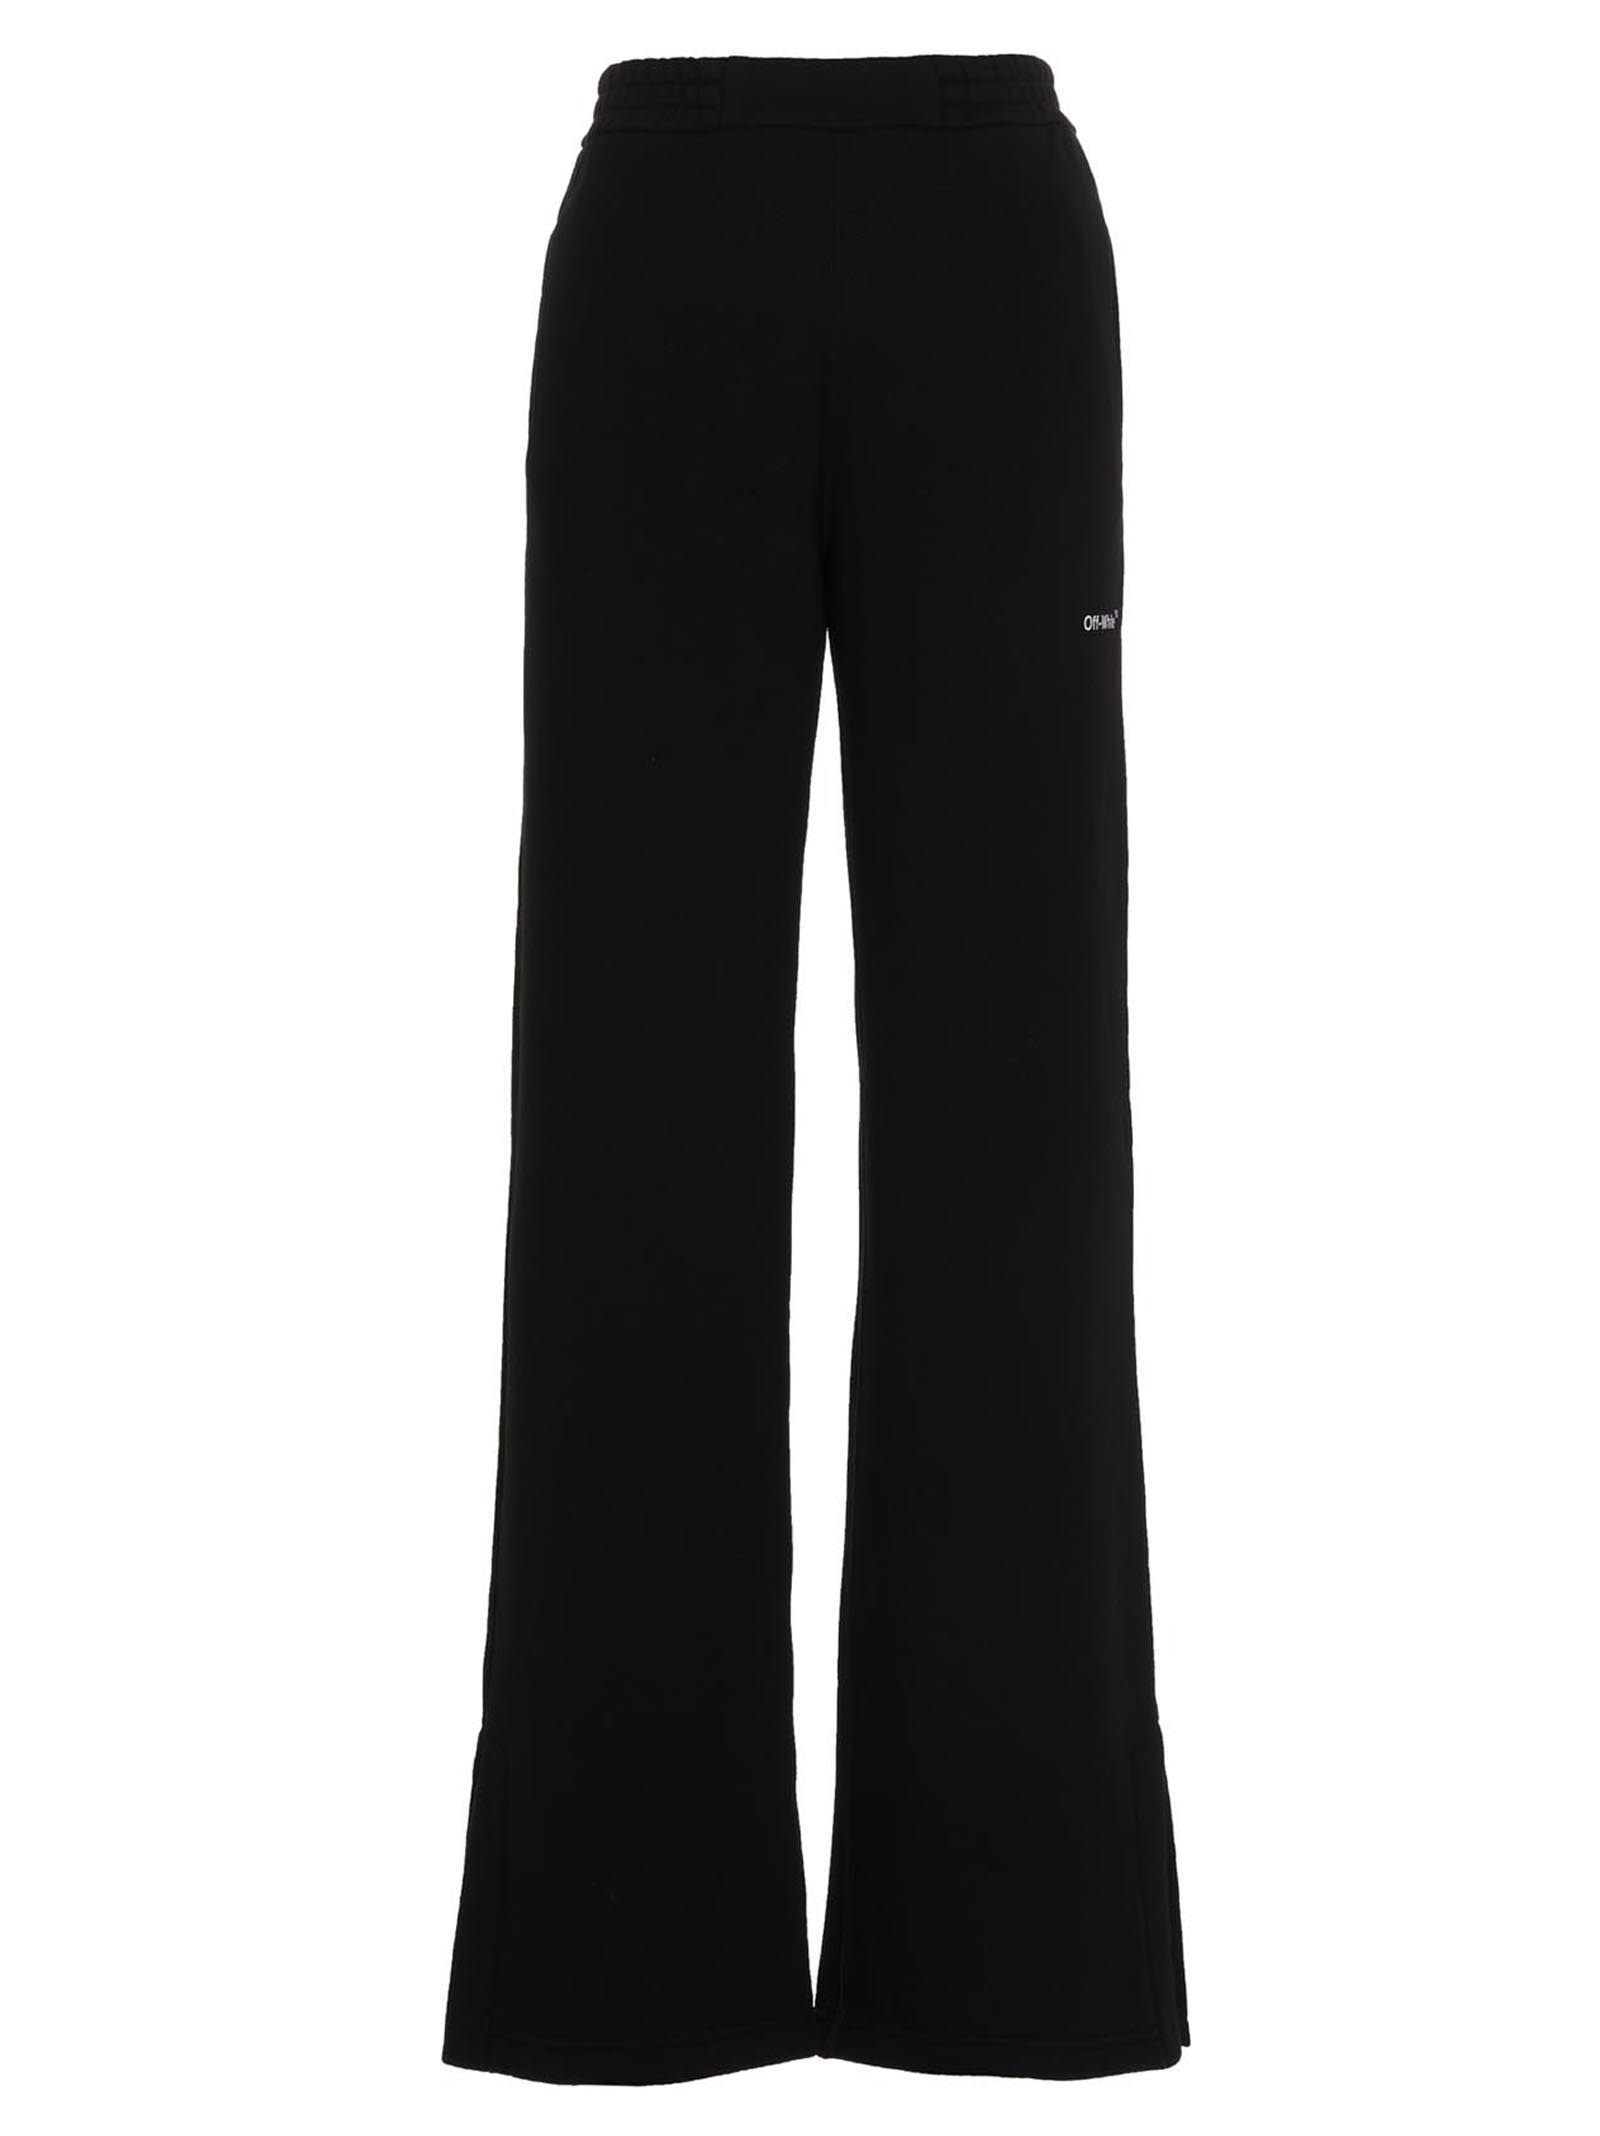 Off-White diag Tapered Pants